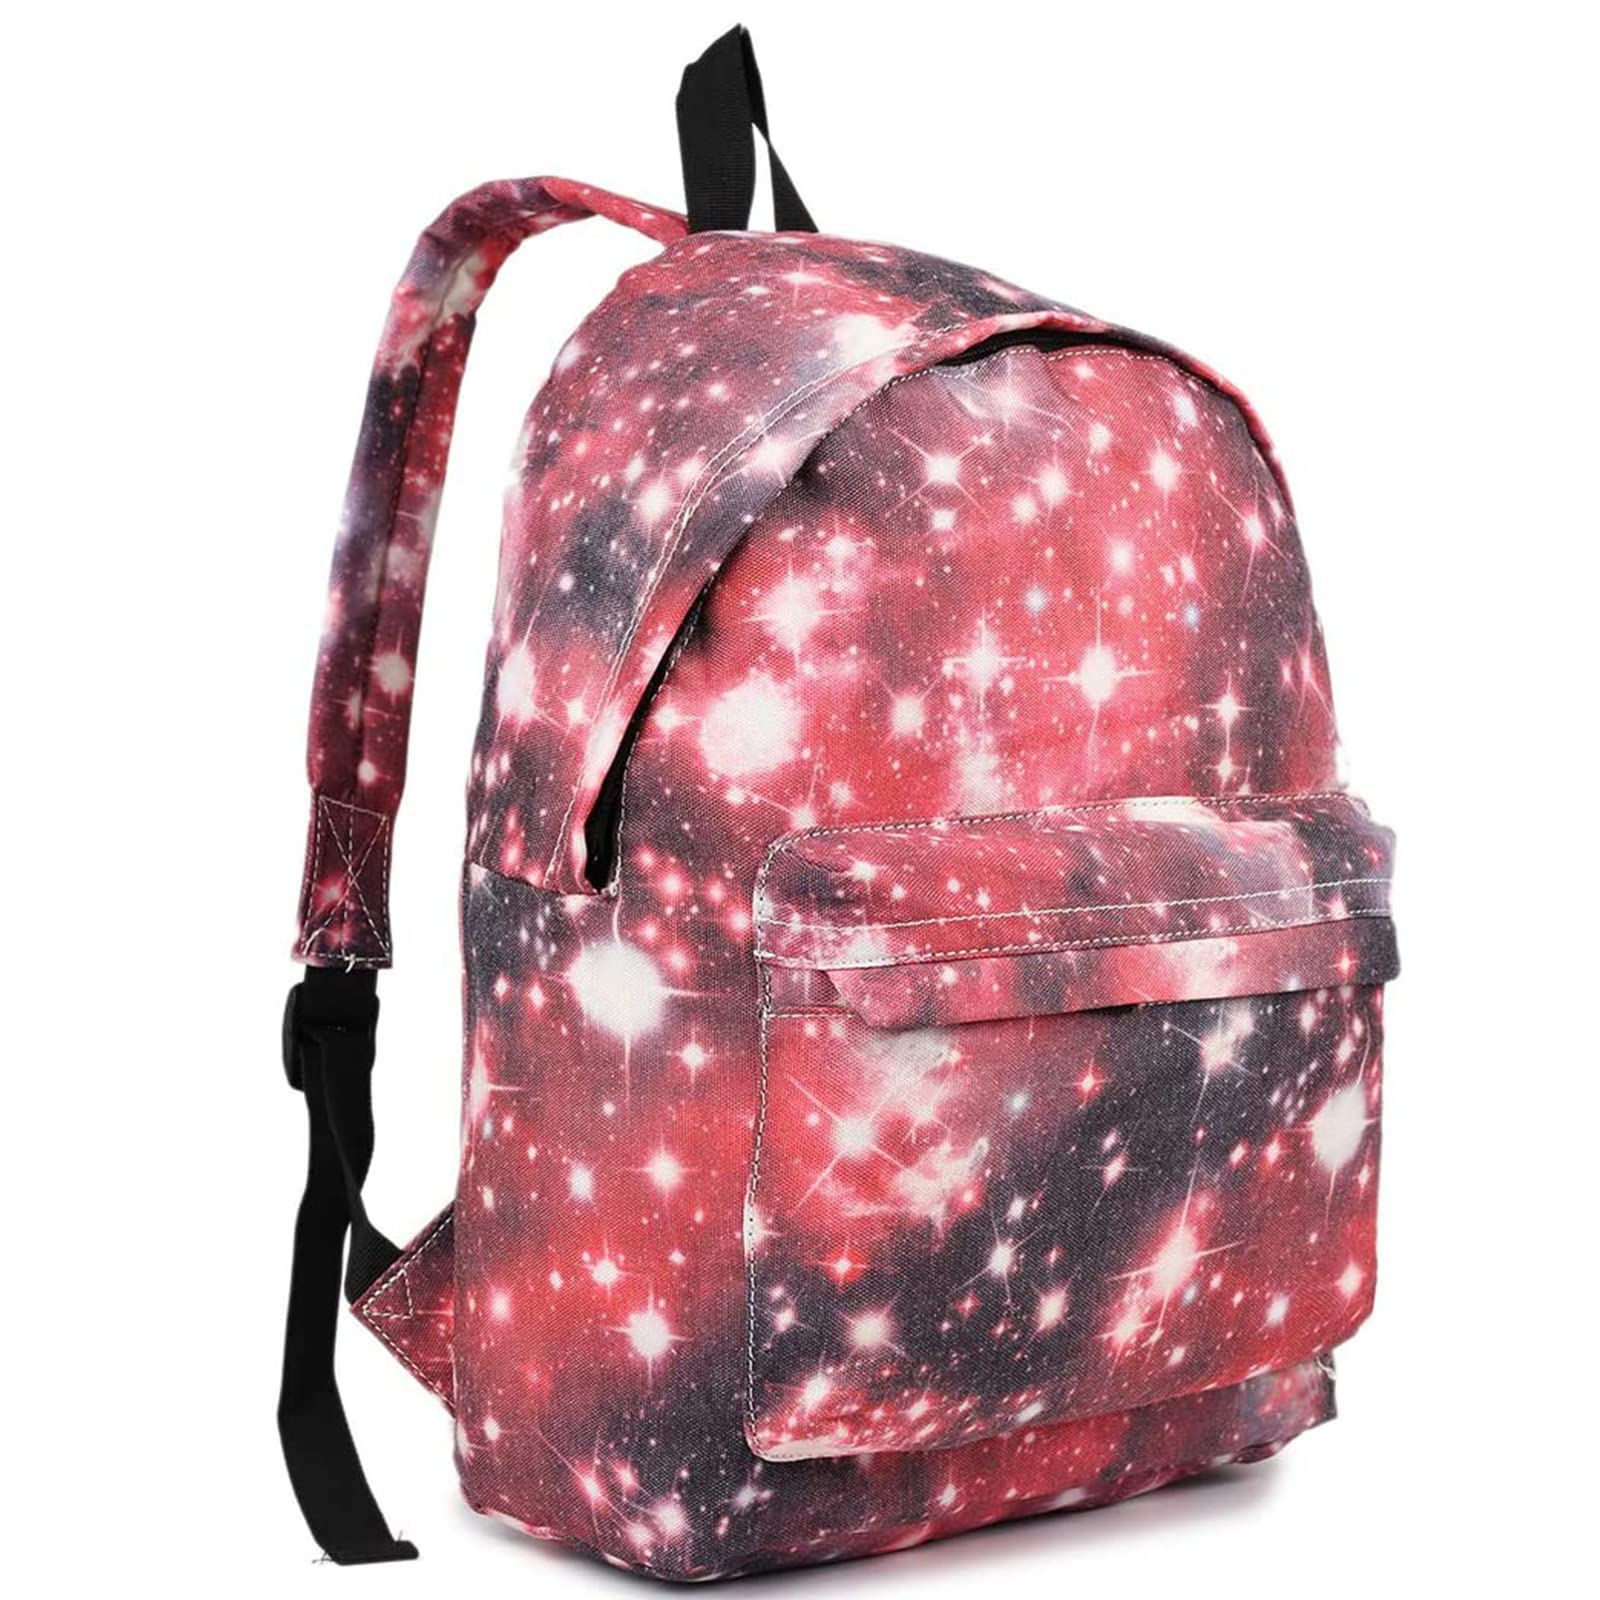 Kono School Bag Teenager Lightwight Canvas Daypack Universe Casual Backpack Fashion Printed Rucksack for Girls Boys (red)